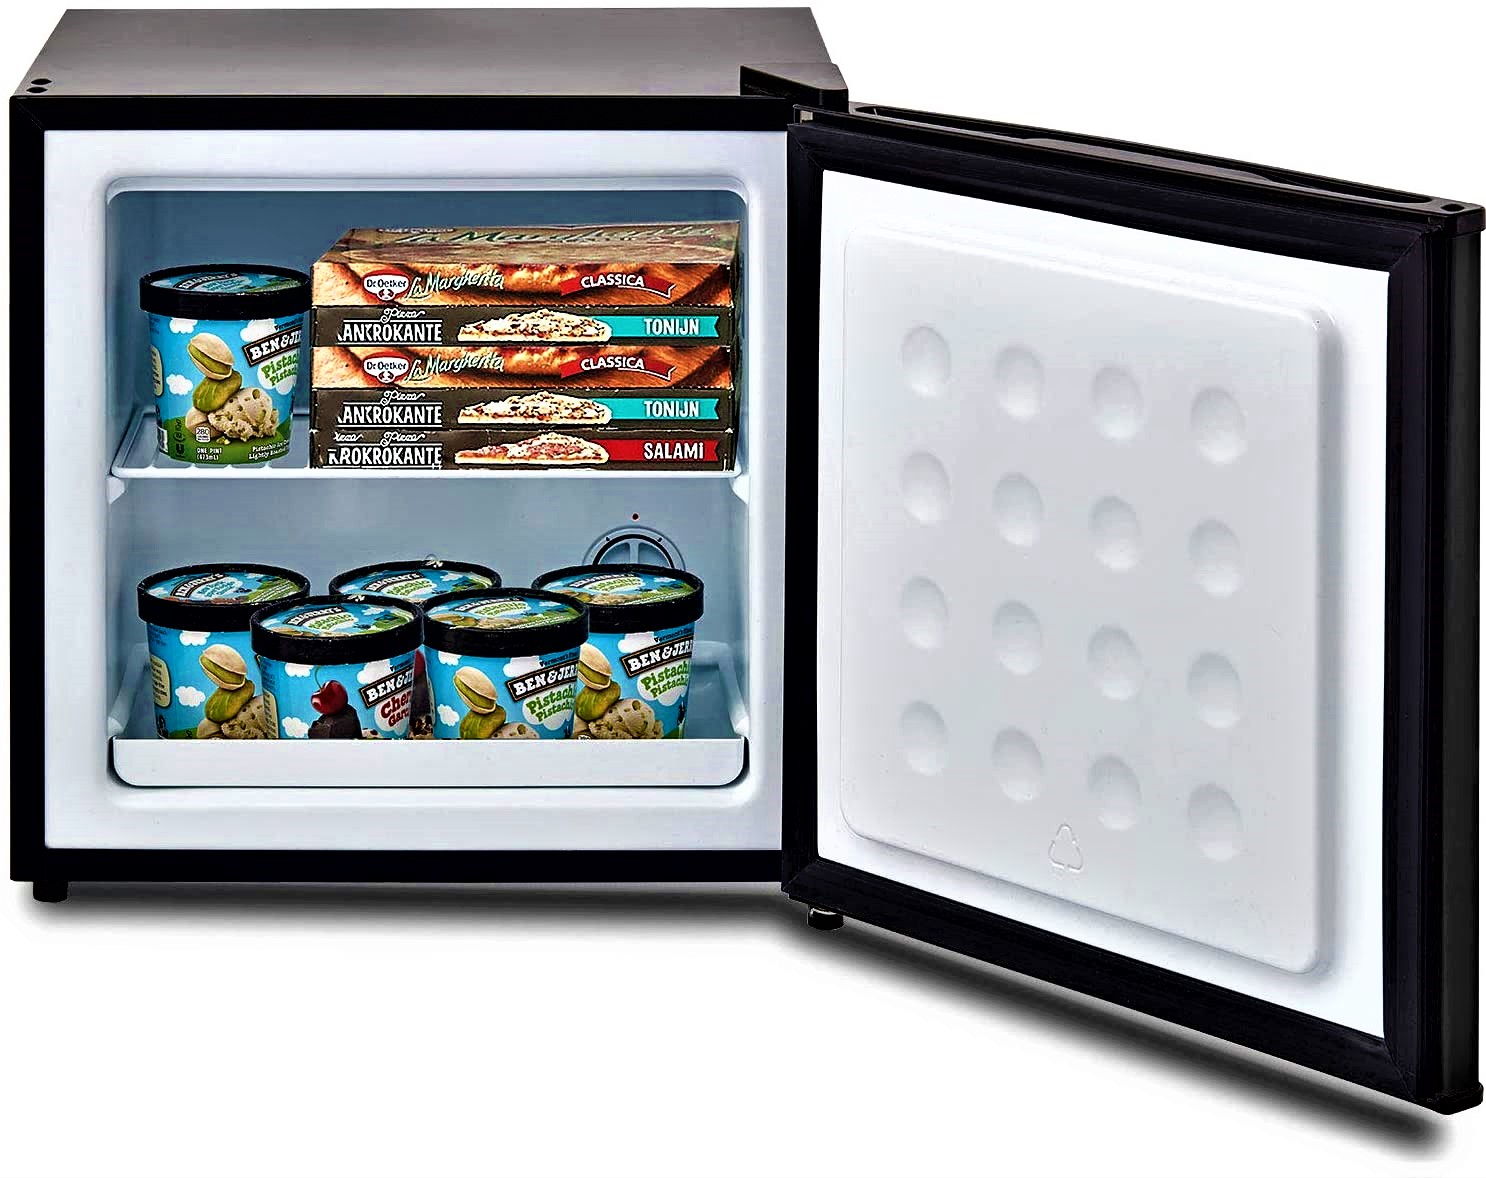 10 Best Countertop Freezer 2022 Review Tabletop Small- Mini Upright Freezer with 1.1 – 2.5 Cu Ft Capacity All In One Cooling Gear Lab: Any Refrigerators Air Conditioners Freezers Ice Makers Coolers Fans Reviewed And Compared.